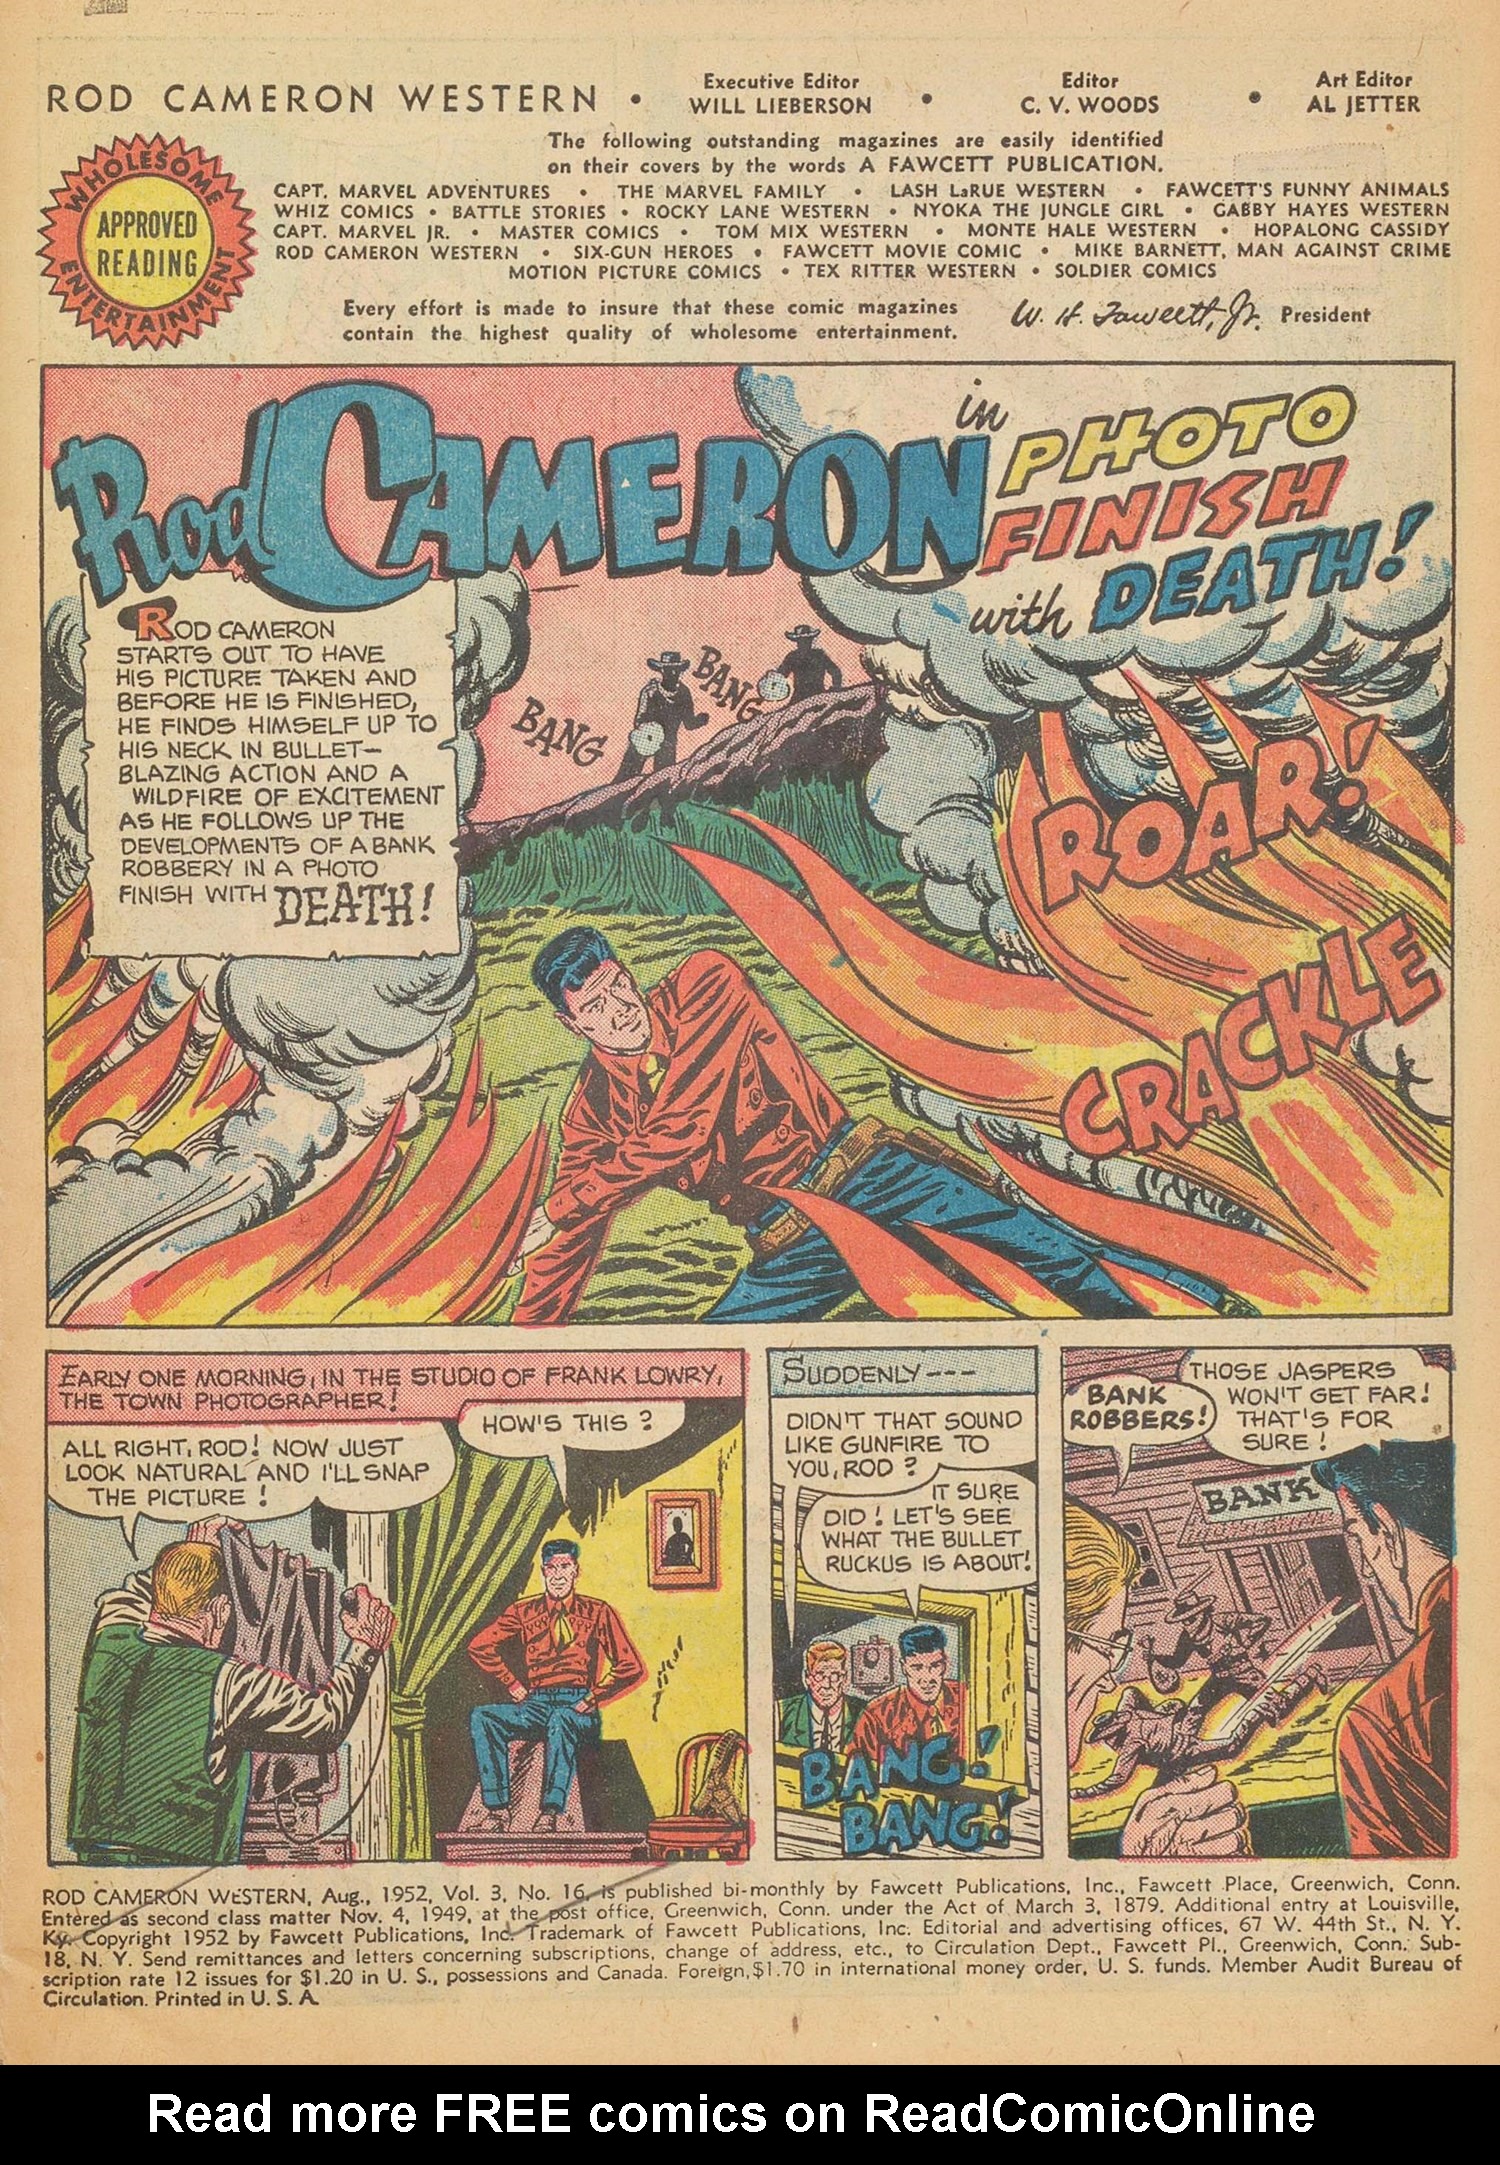 Read online Rod Cameron Western comic -  Issue #16 - 3